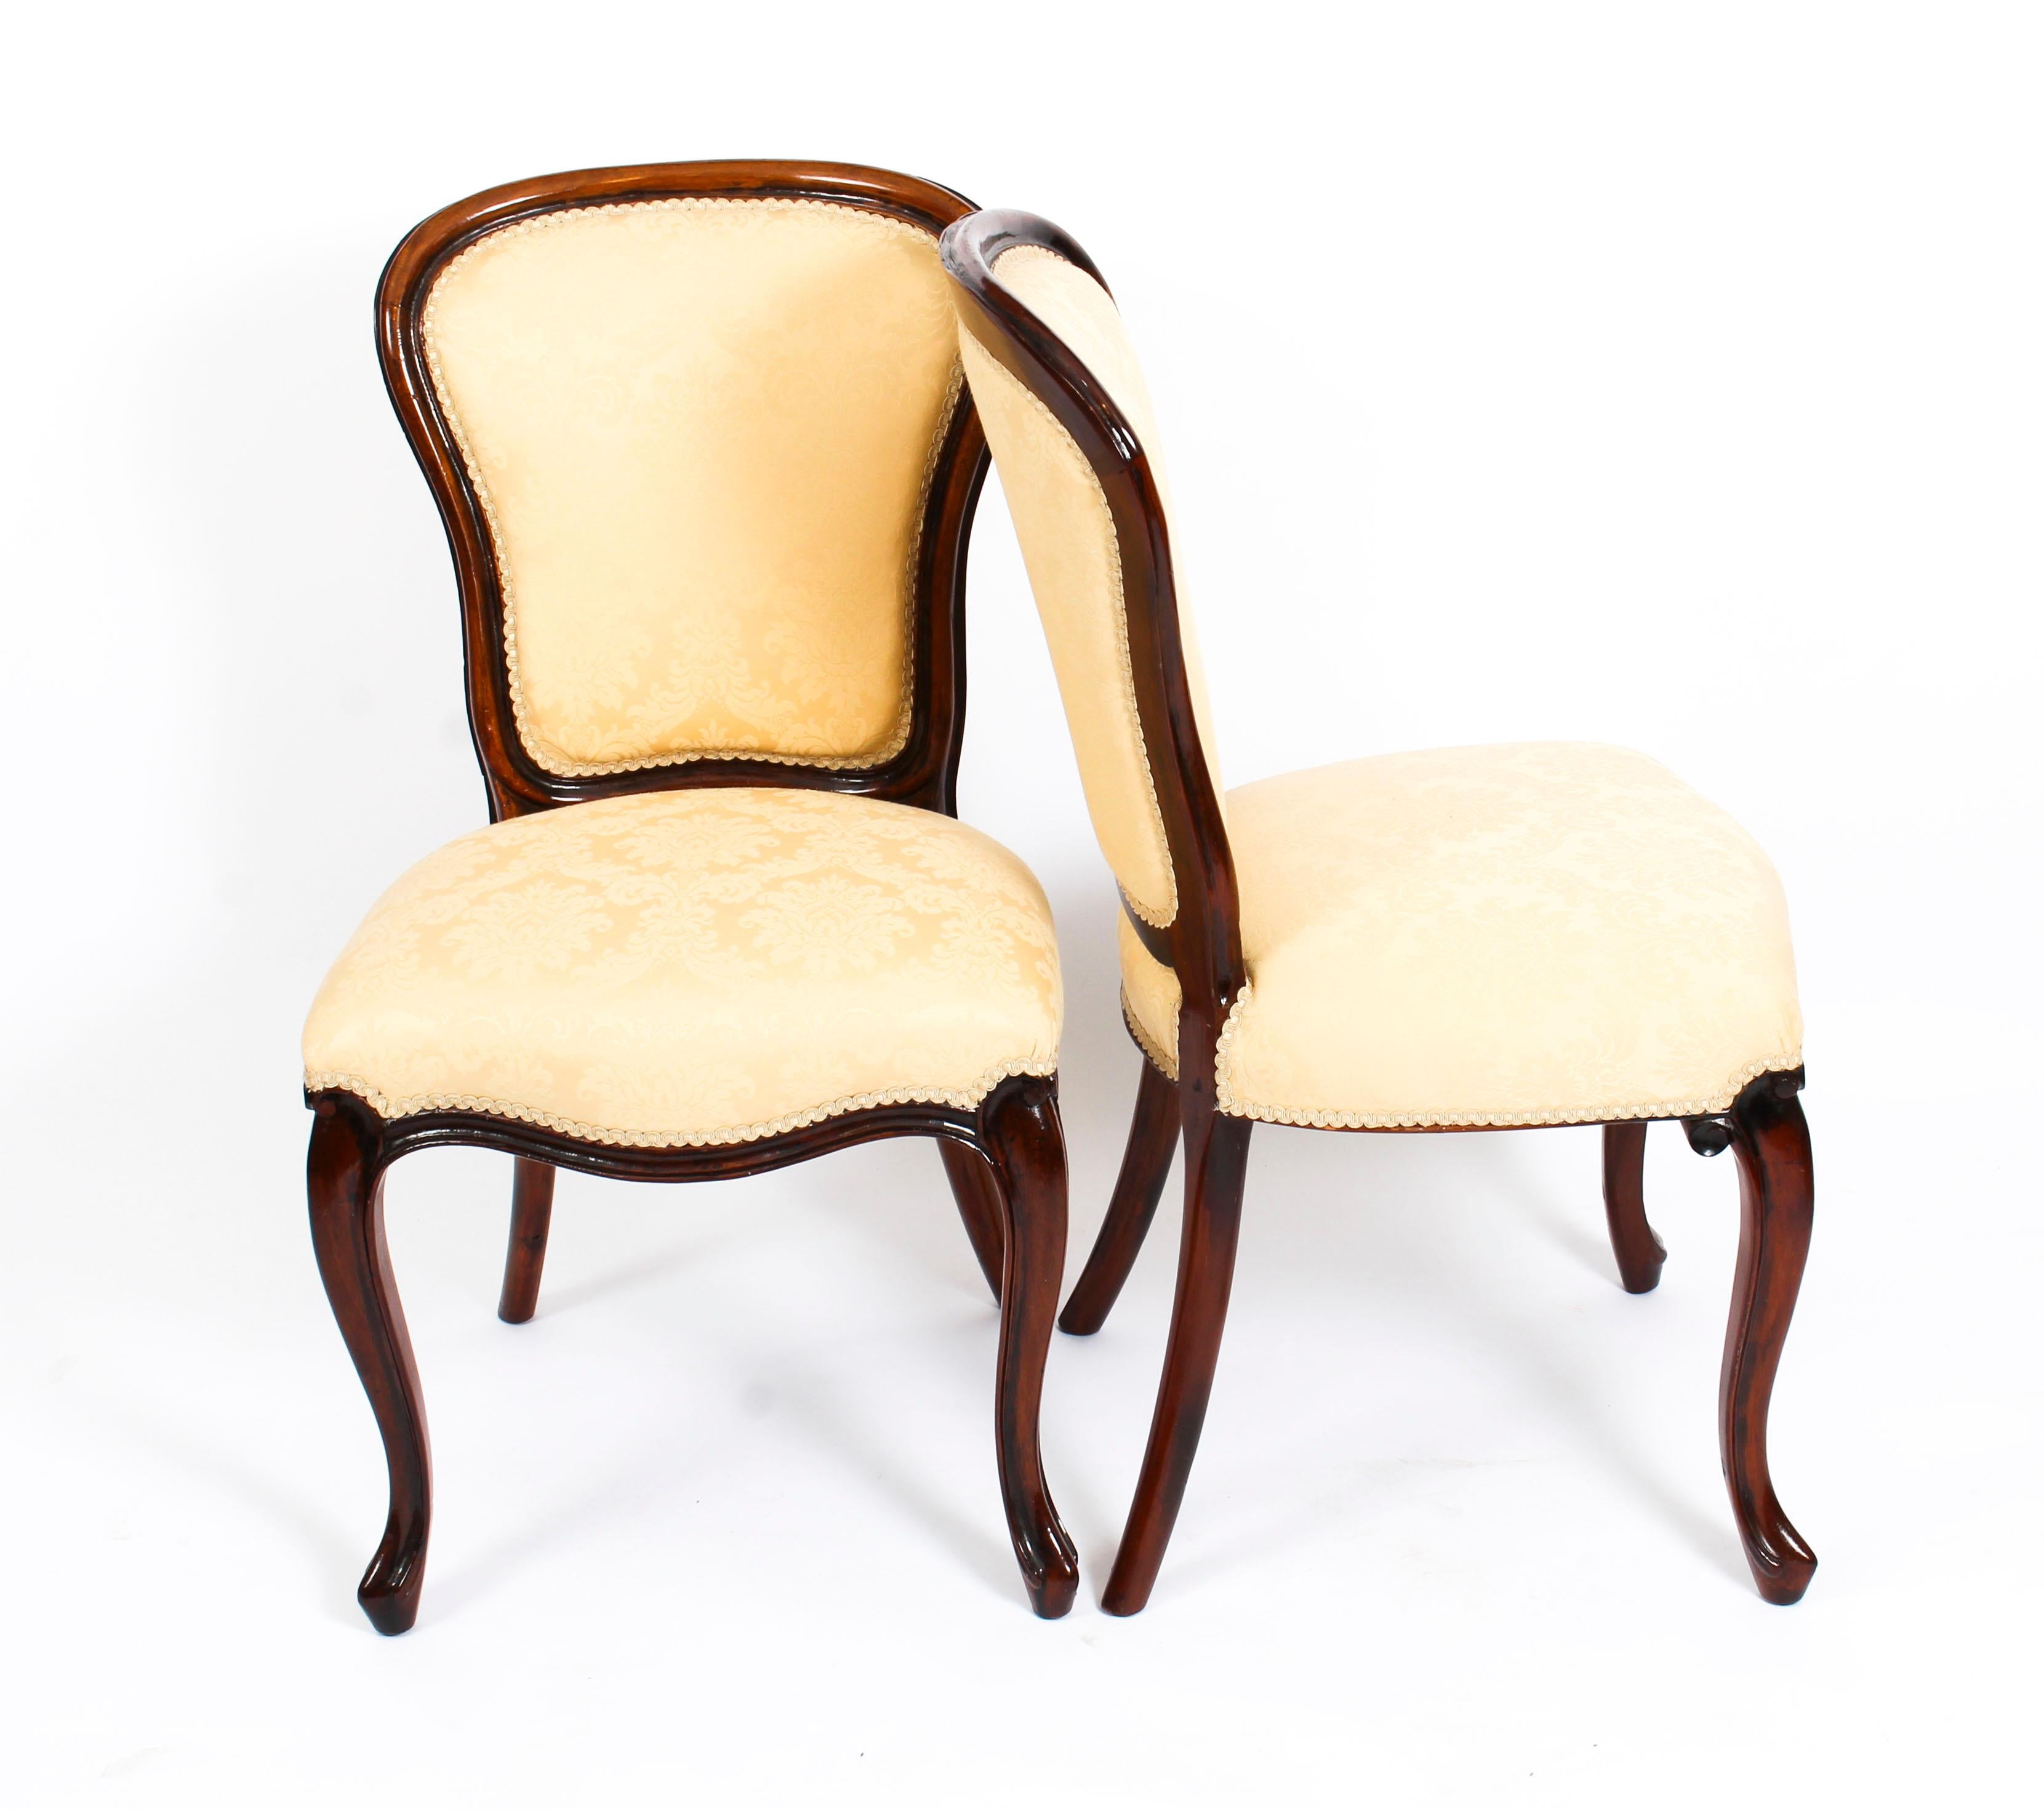 This is a beautiful antique set of ten Louis Revival mahogany dining chairs, dating from the late 19th century.

This set consists of ten side chairs all skillfully carved from solid mahogany and beautifully reupholstered in gold damask.

They